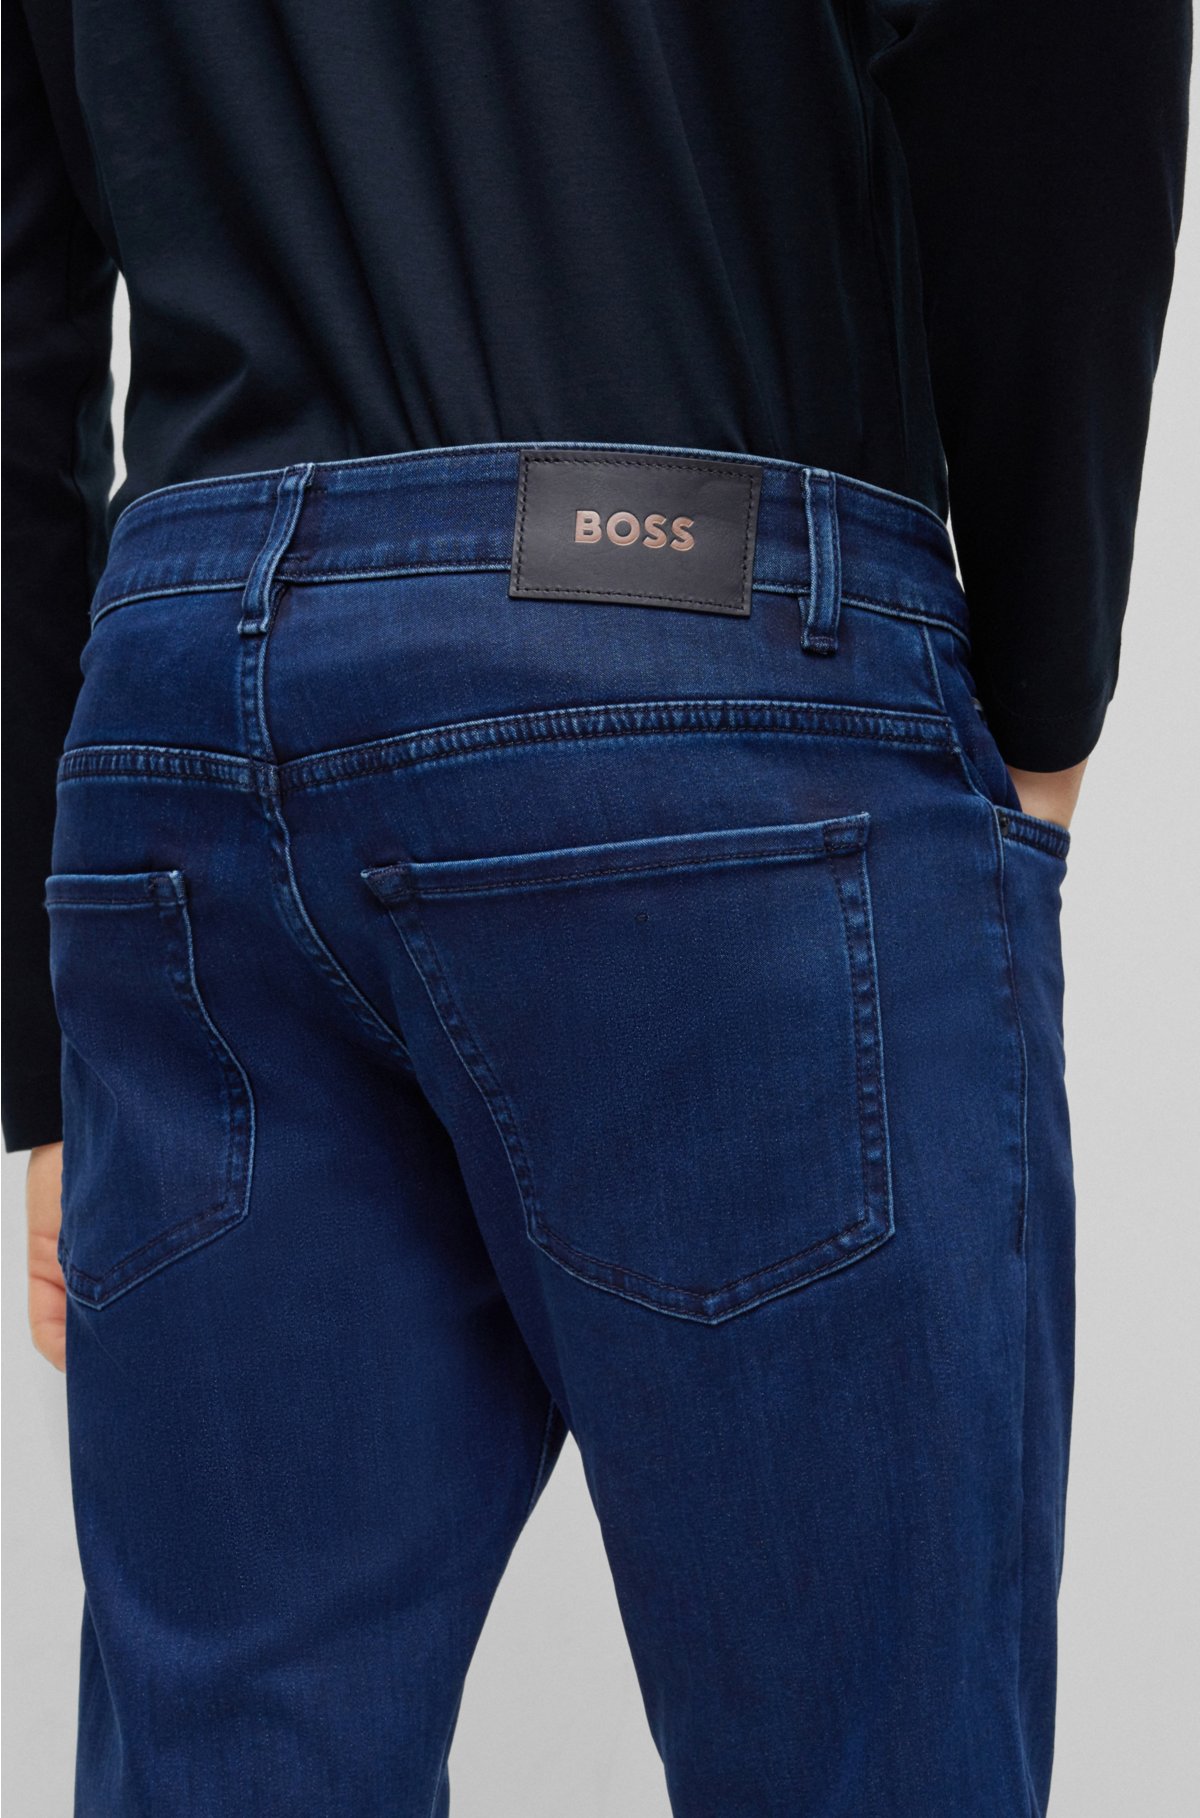 in - jeans denim BOSS blue satin-touch Slim-fit